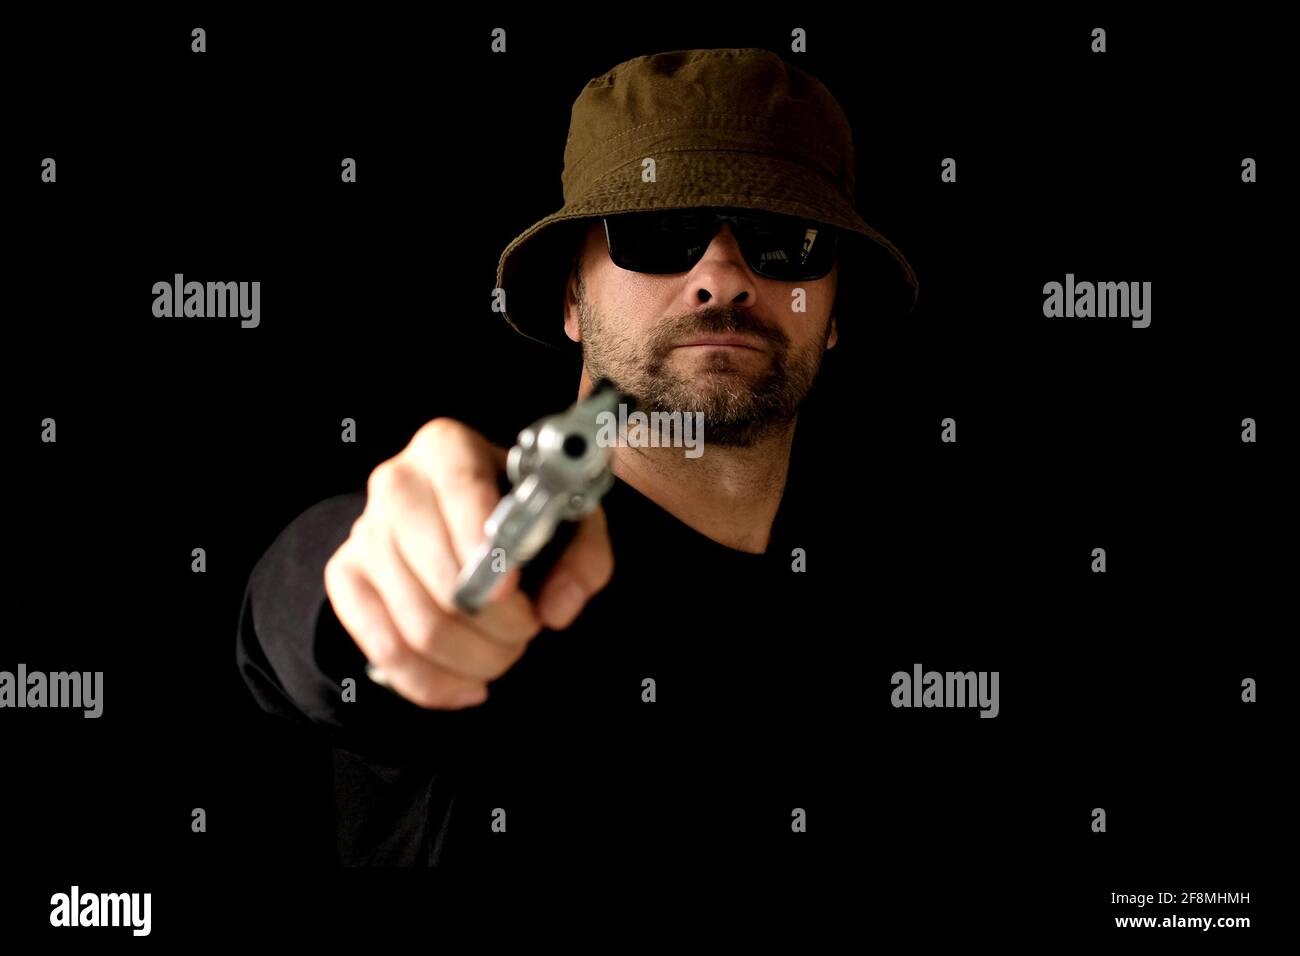 Gangster Male contract killer with revolver looks at the camera. Bald man killer aiming a revolver pistol at you. Stock Photo